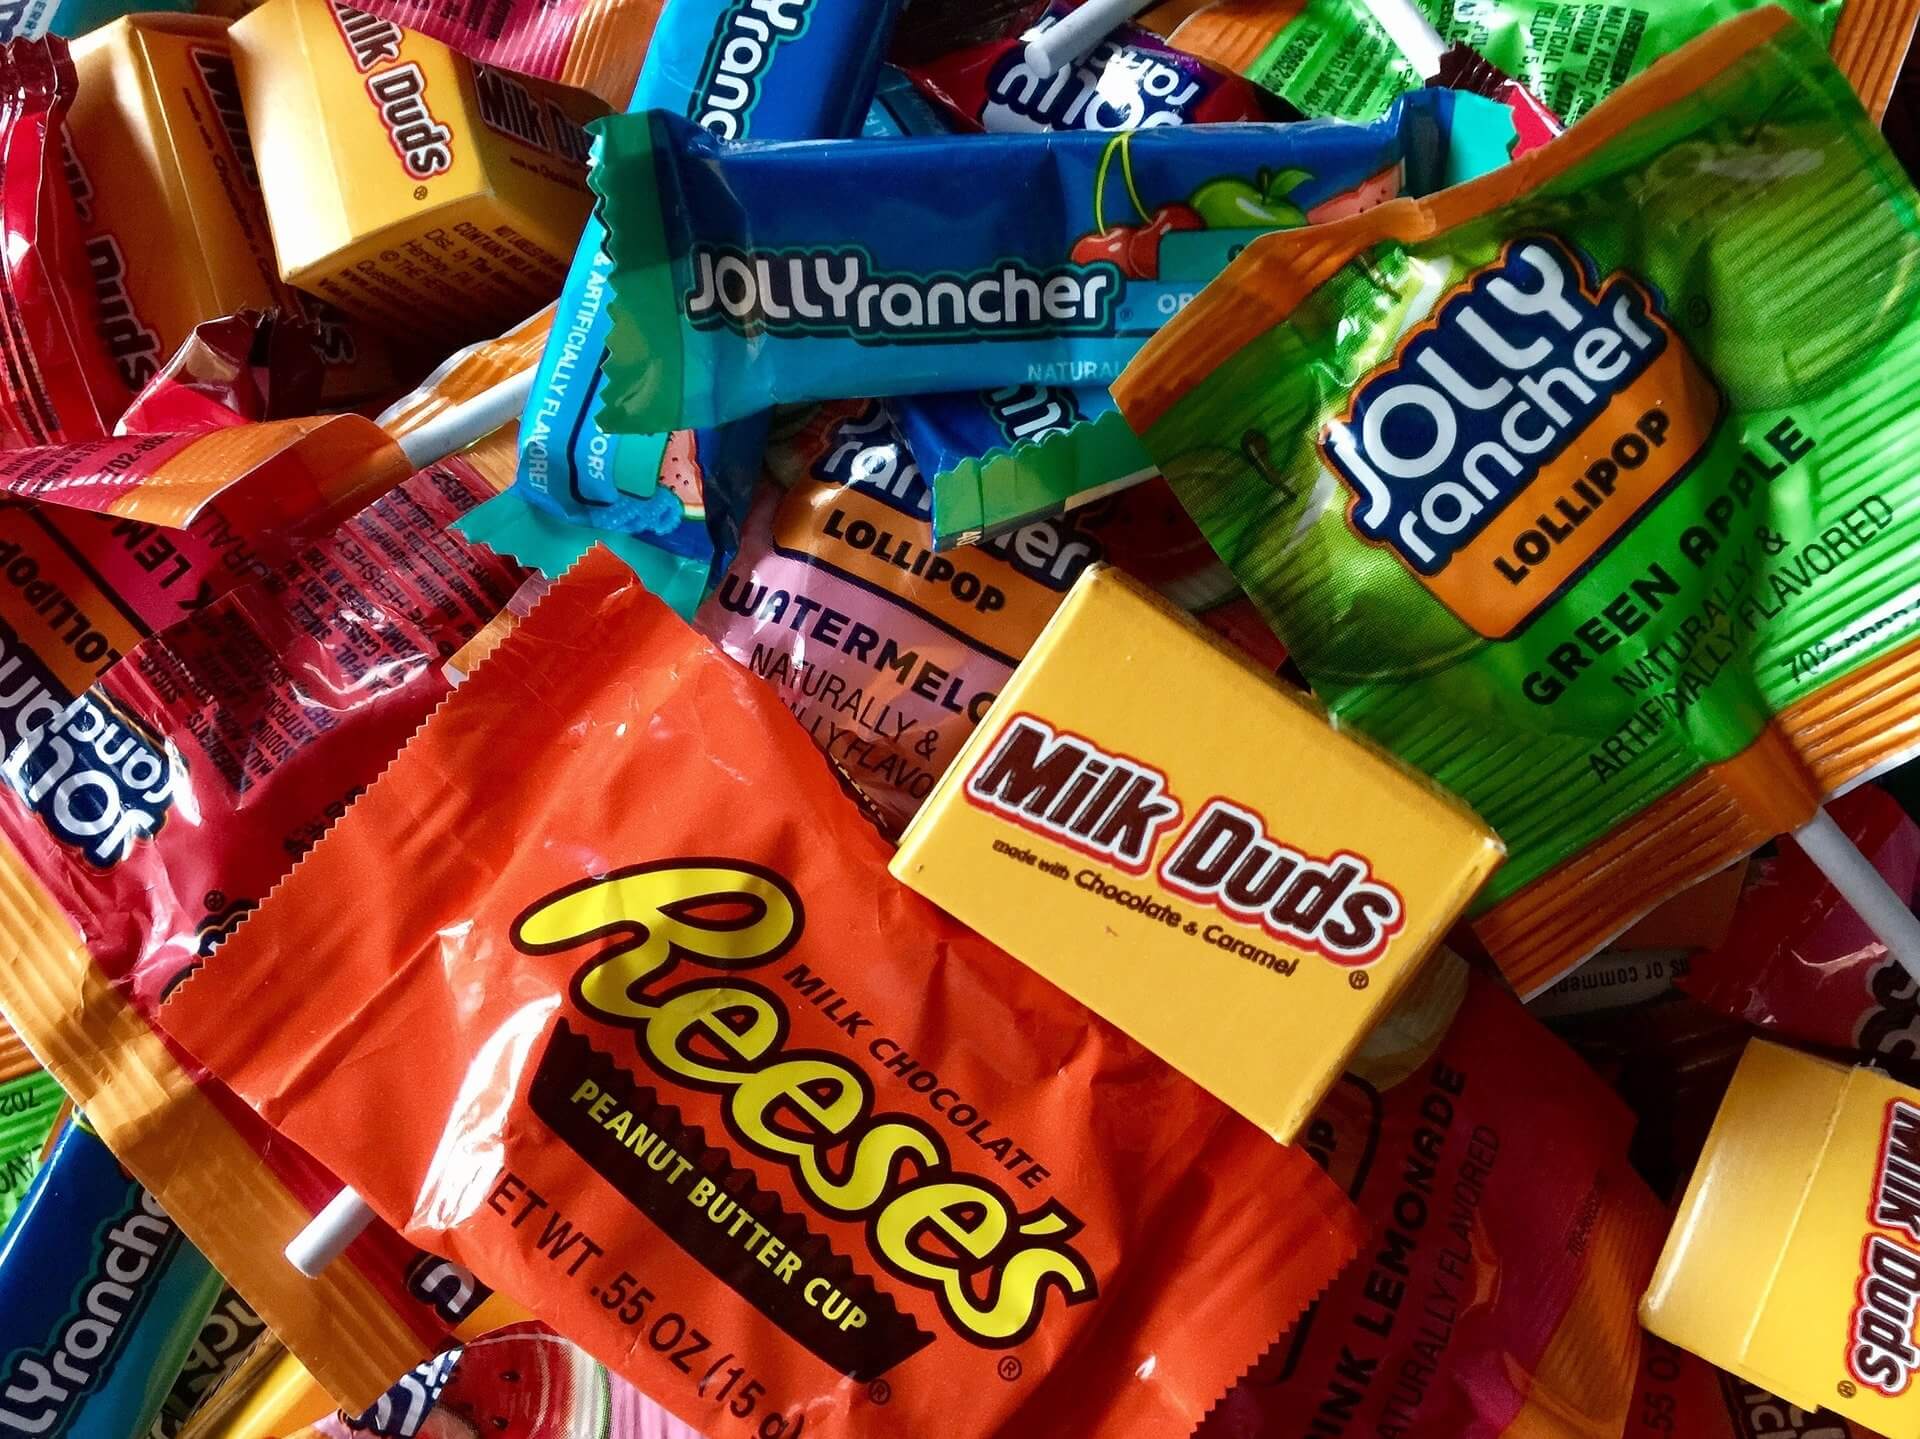 How Much Halloween Candy Would You Have to Eat to Overdose?